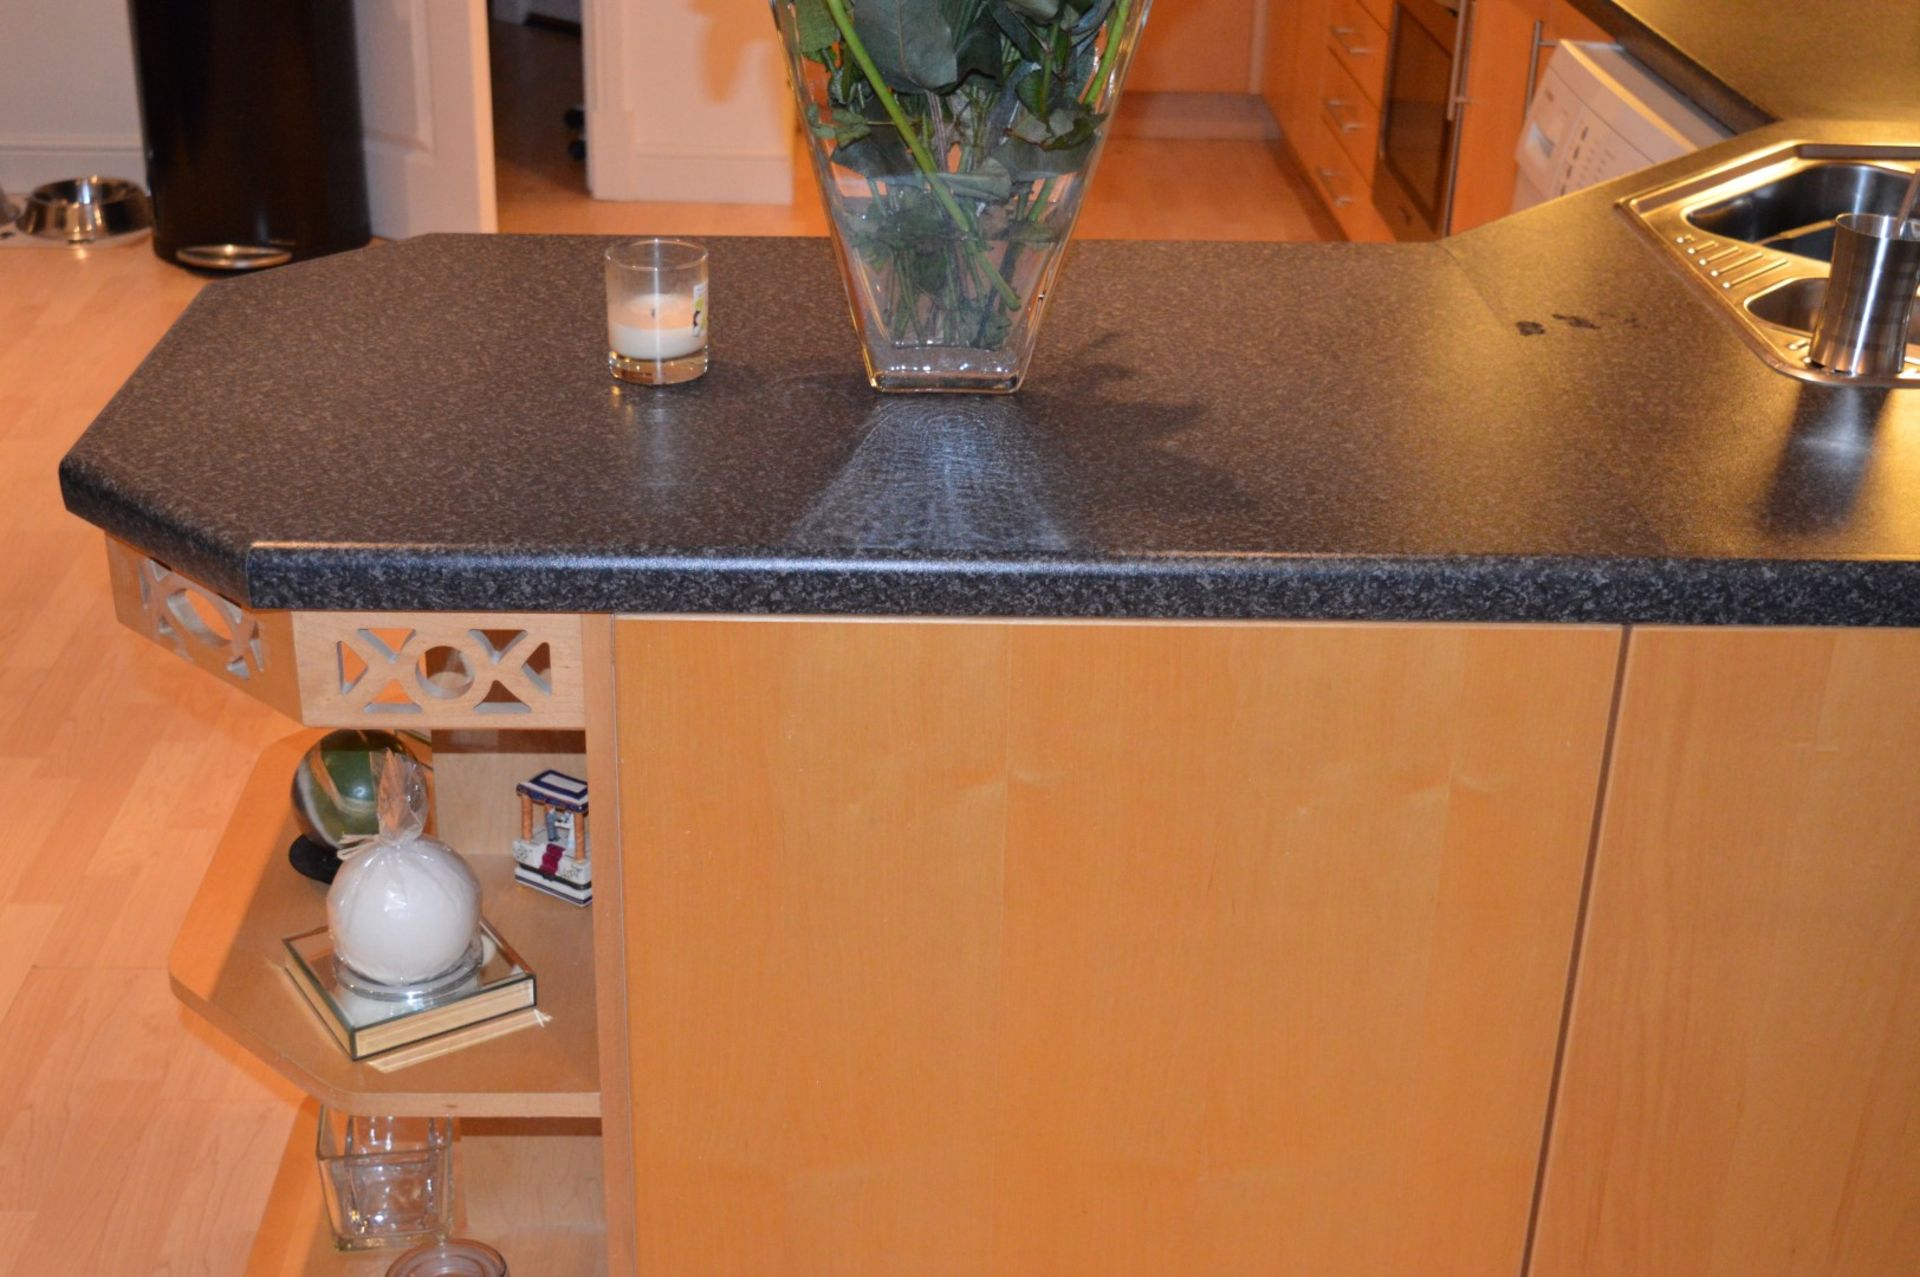 1 x Manor Cabinet Company Fitted Kitchen - Contemporary Beech Finish With Black Worktops and - Image 7 of 47